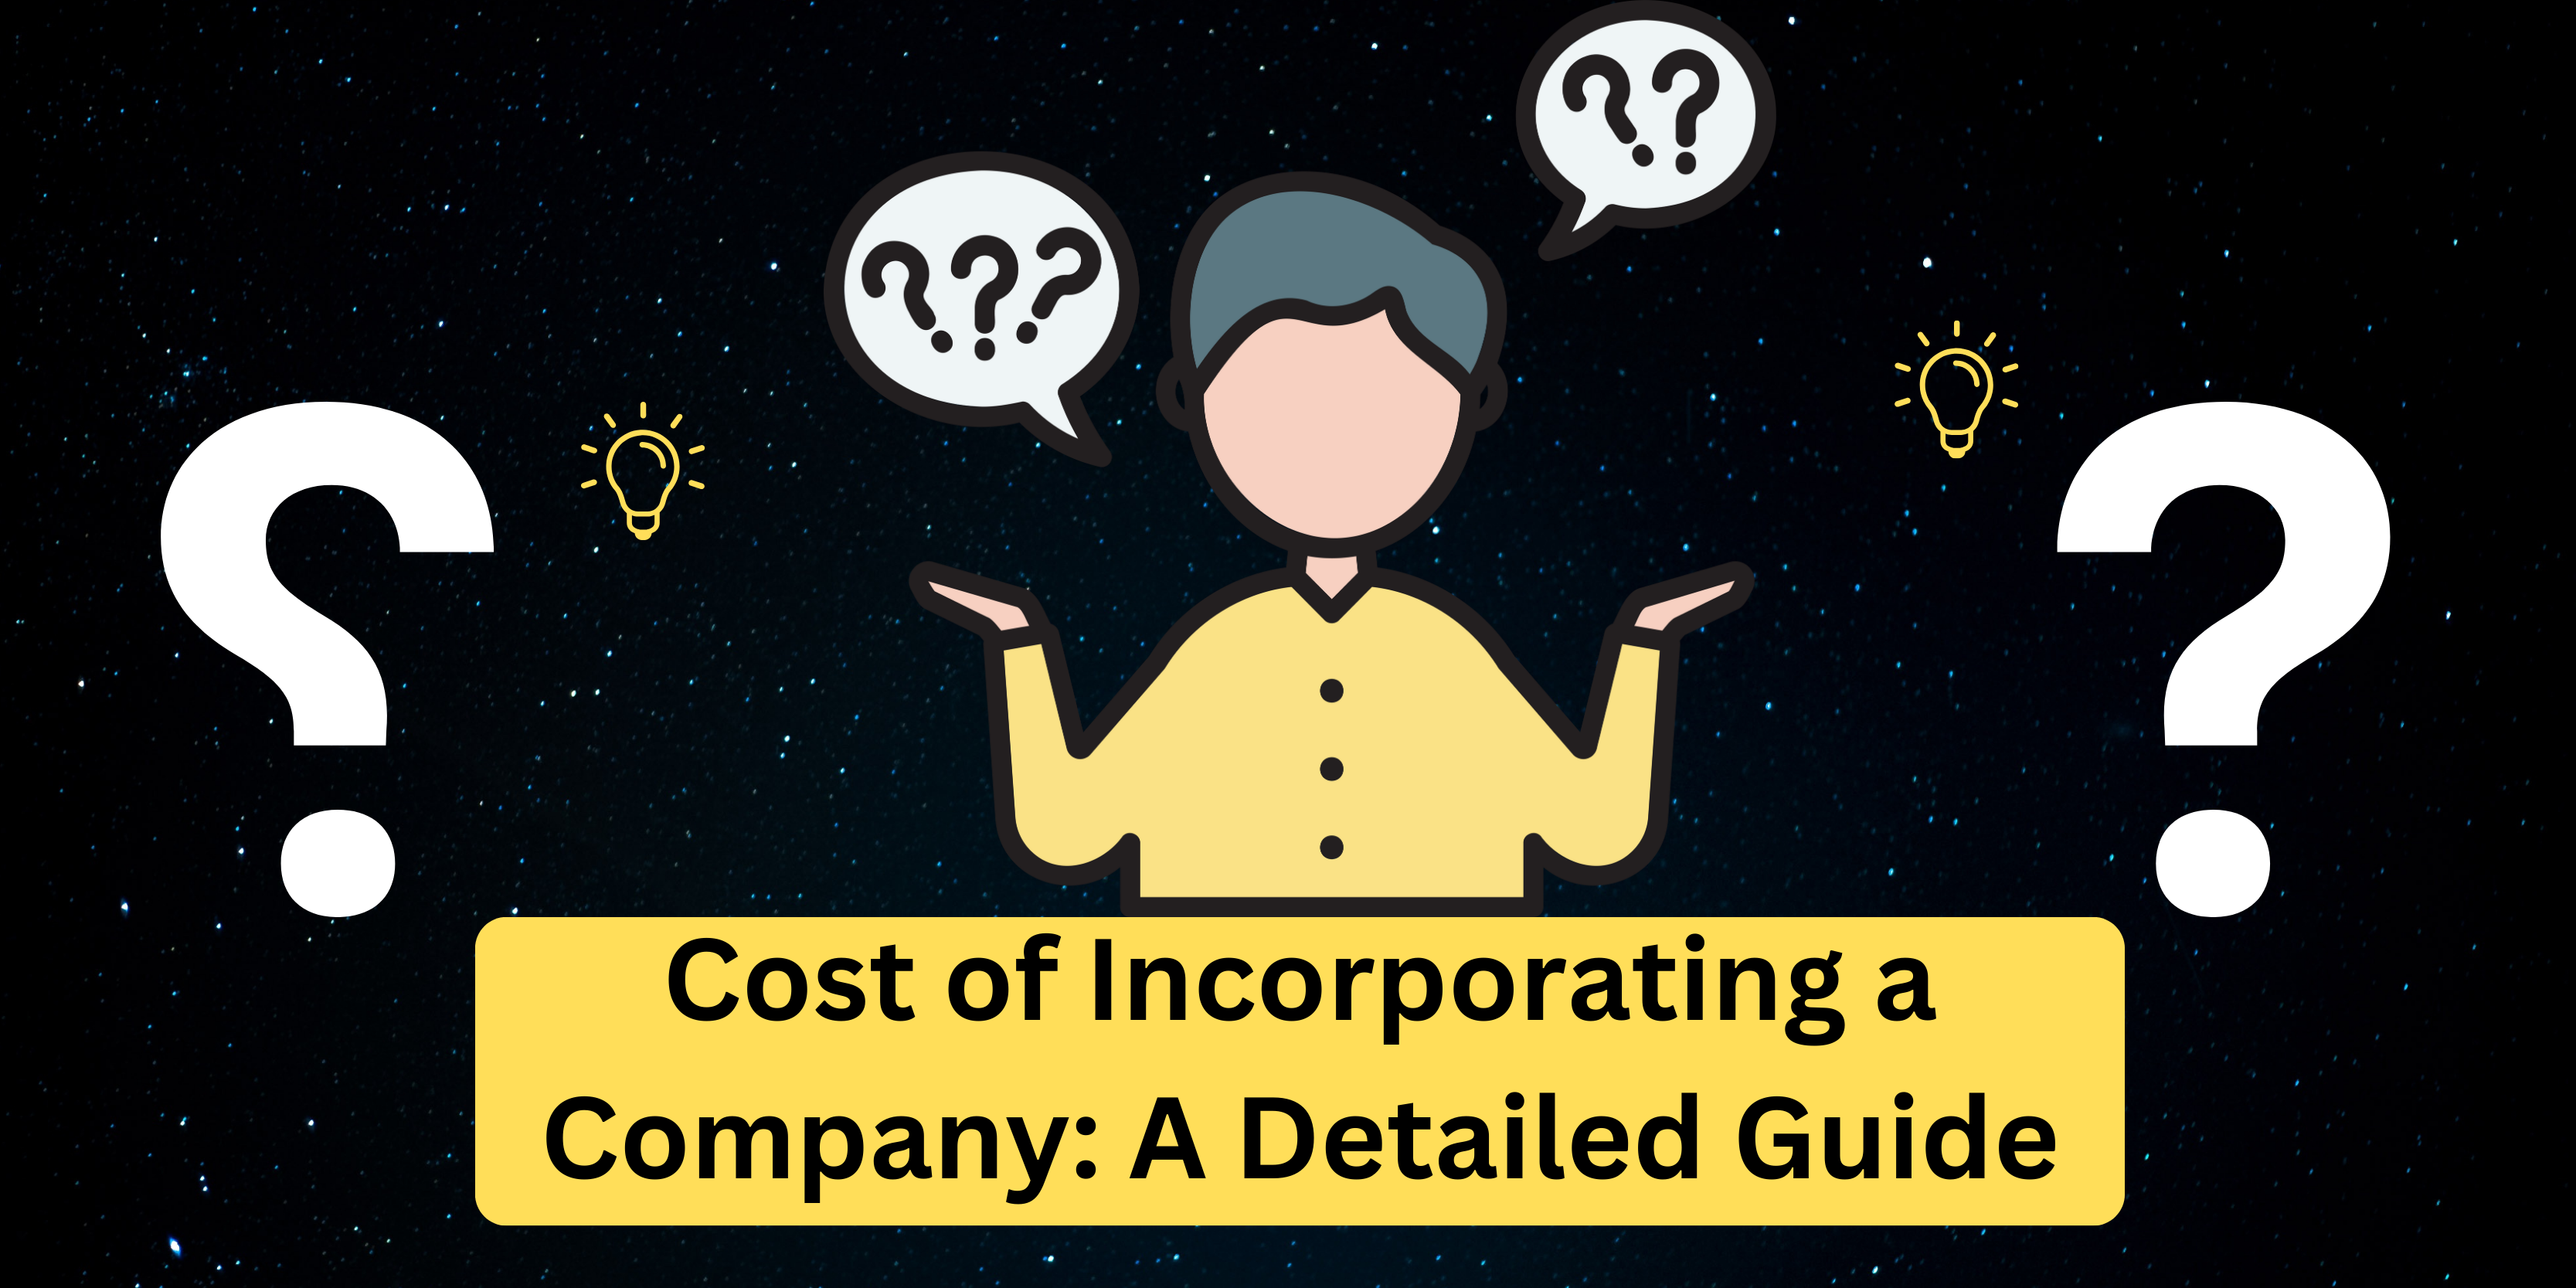 Cost of Incorporating a Company: A Detailed Guide